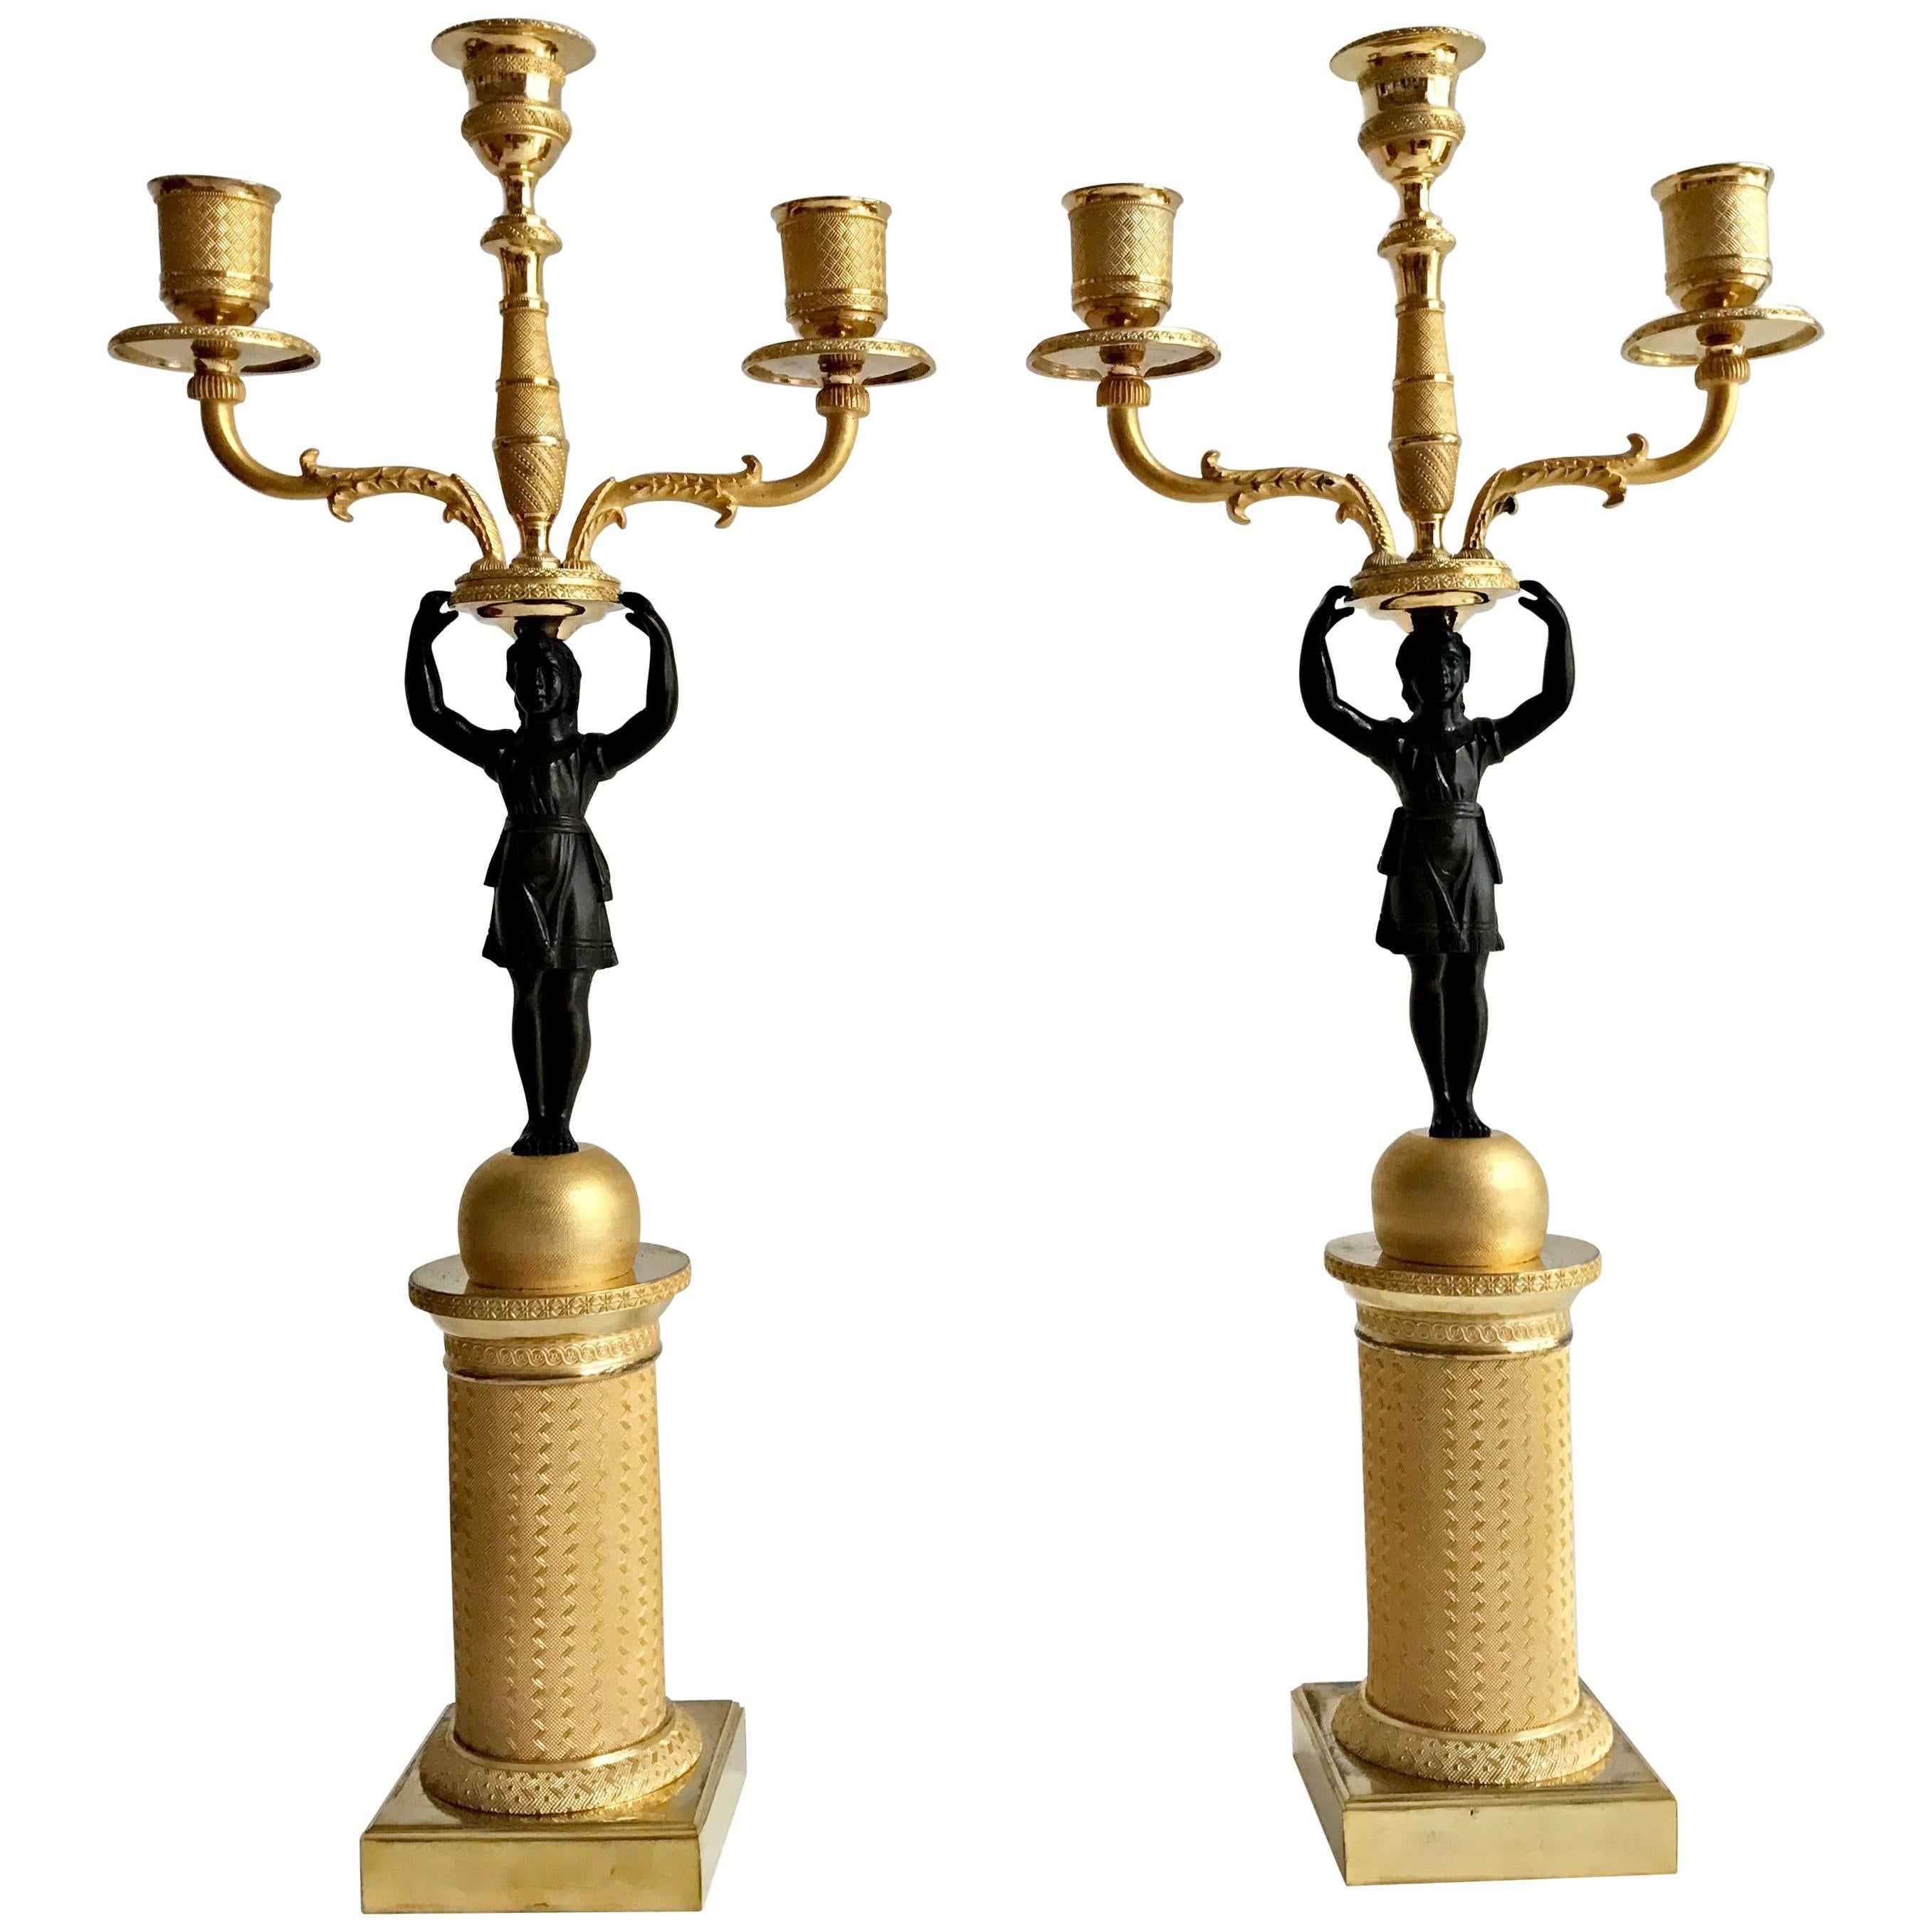 Rare Pair of Empire Ormolu and Painted Candlesticks For Sale